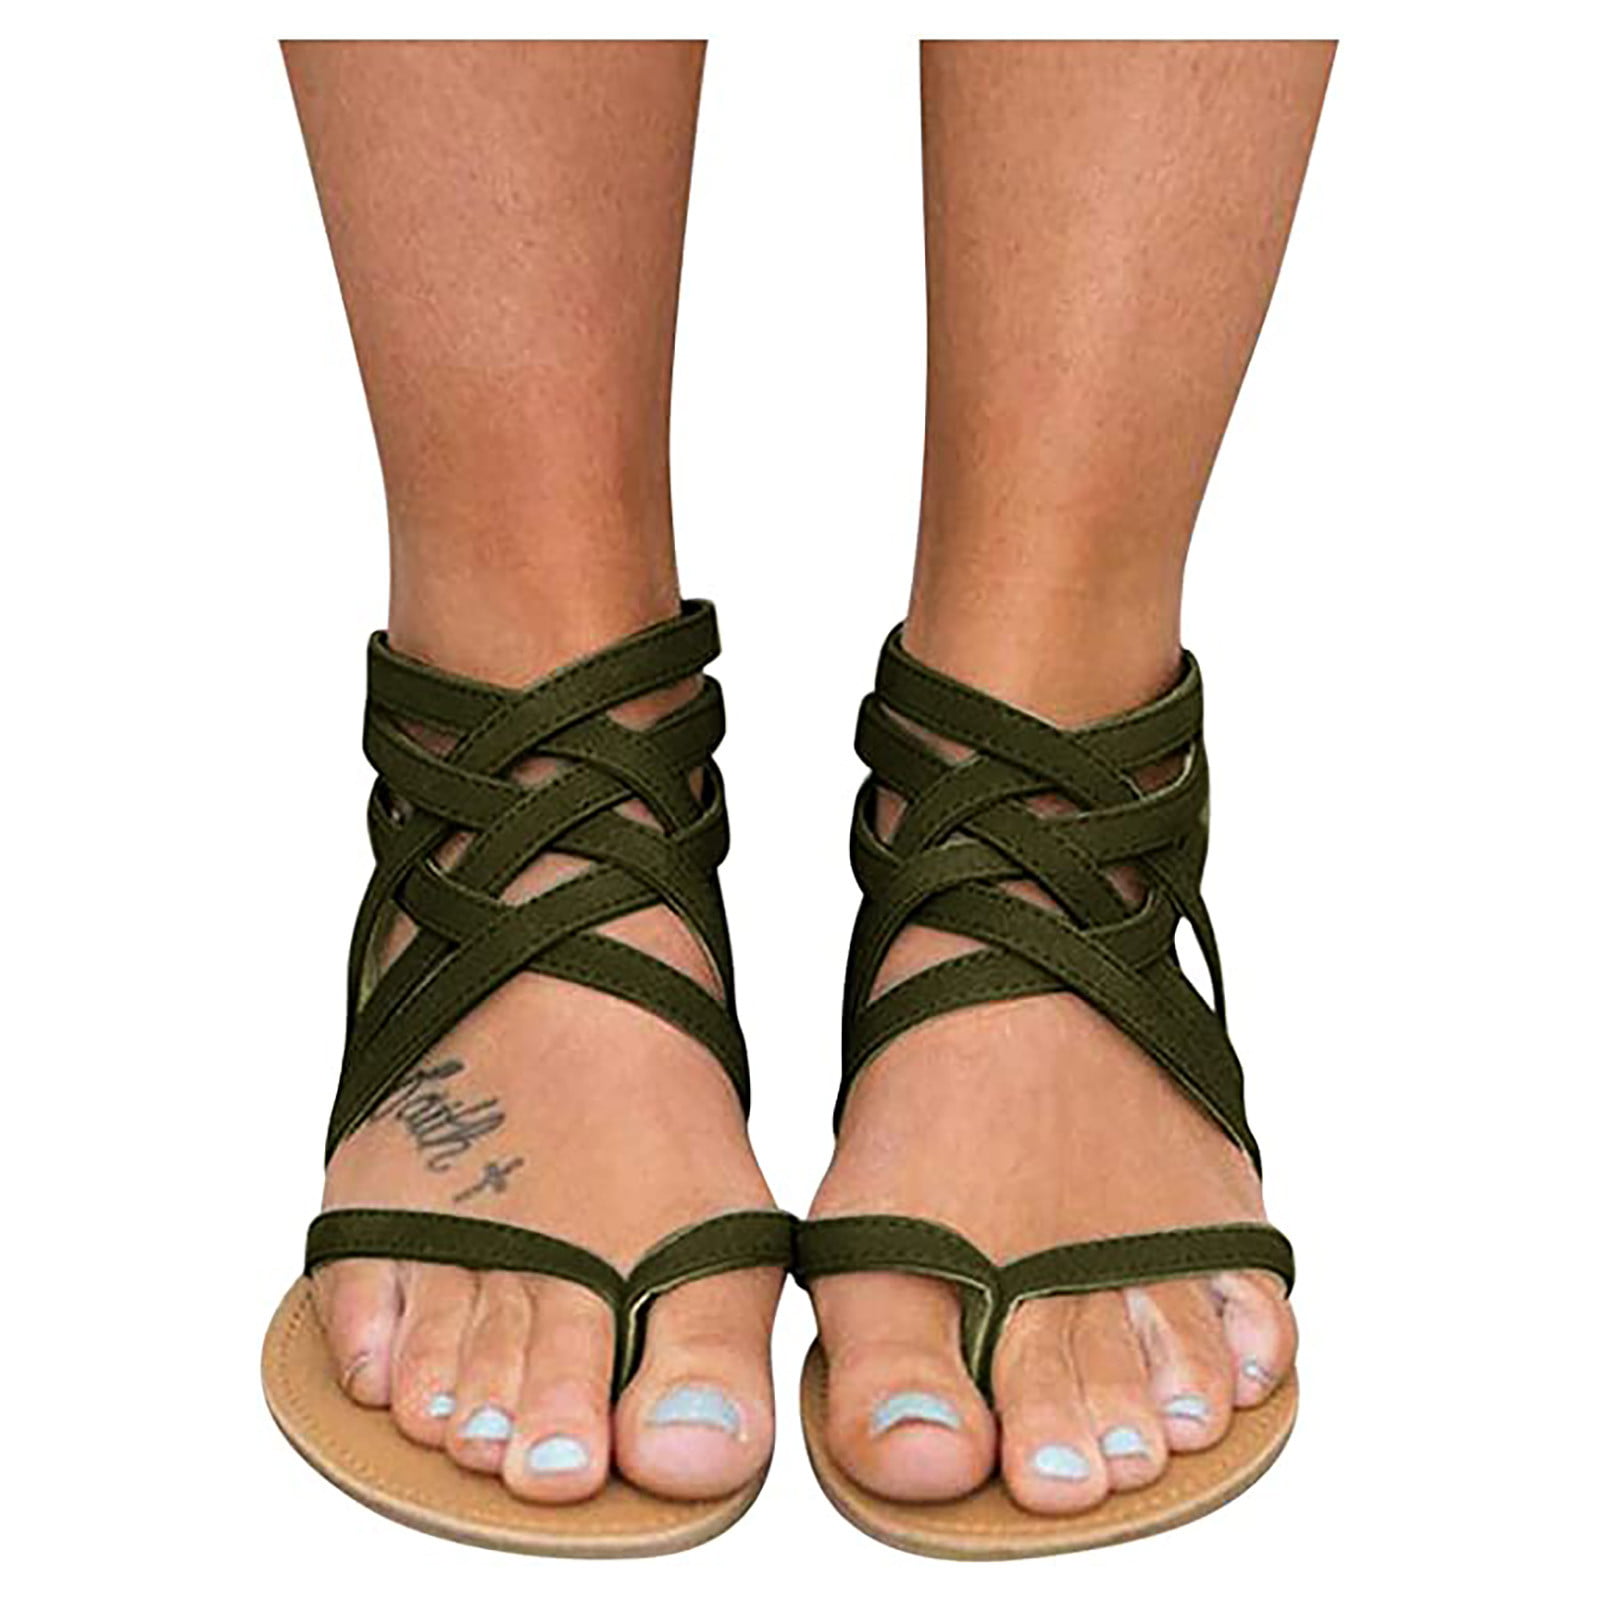 WOMENS FLAT ZIP UP STRAPPY CAGED GLADIATOR SUMMER SANDALS OPEN TOE BEACH SHOES 3 